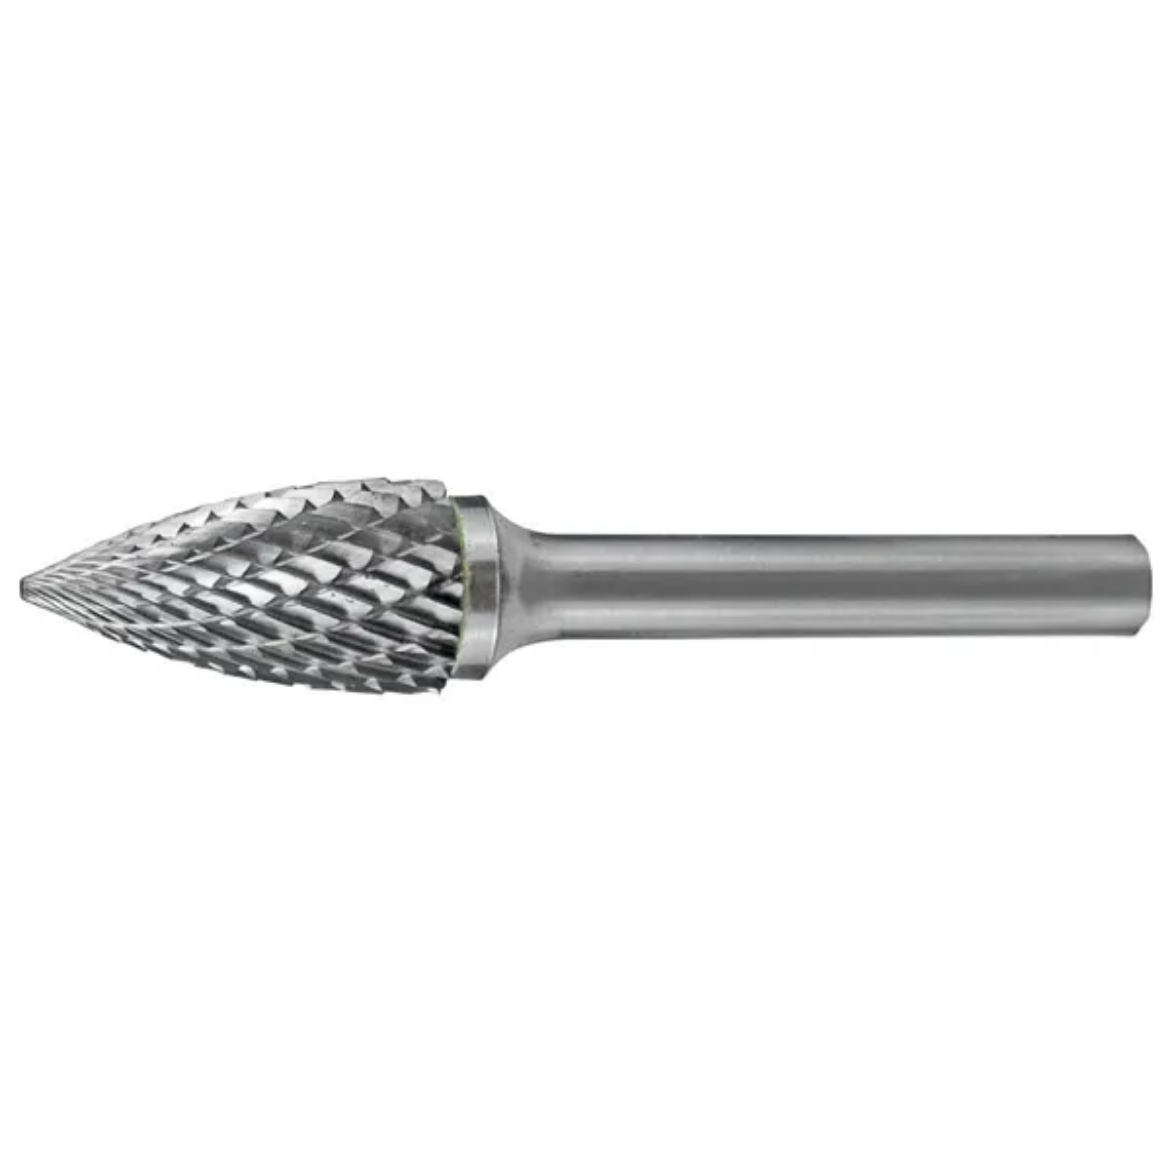 Picture of HOLEMAKER CARBIDE BURR, TREE SHAPE POINTED END 3/8" X 3/4" HEAD, 1/4" SHANK DC